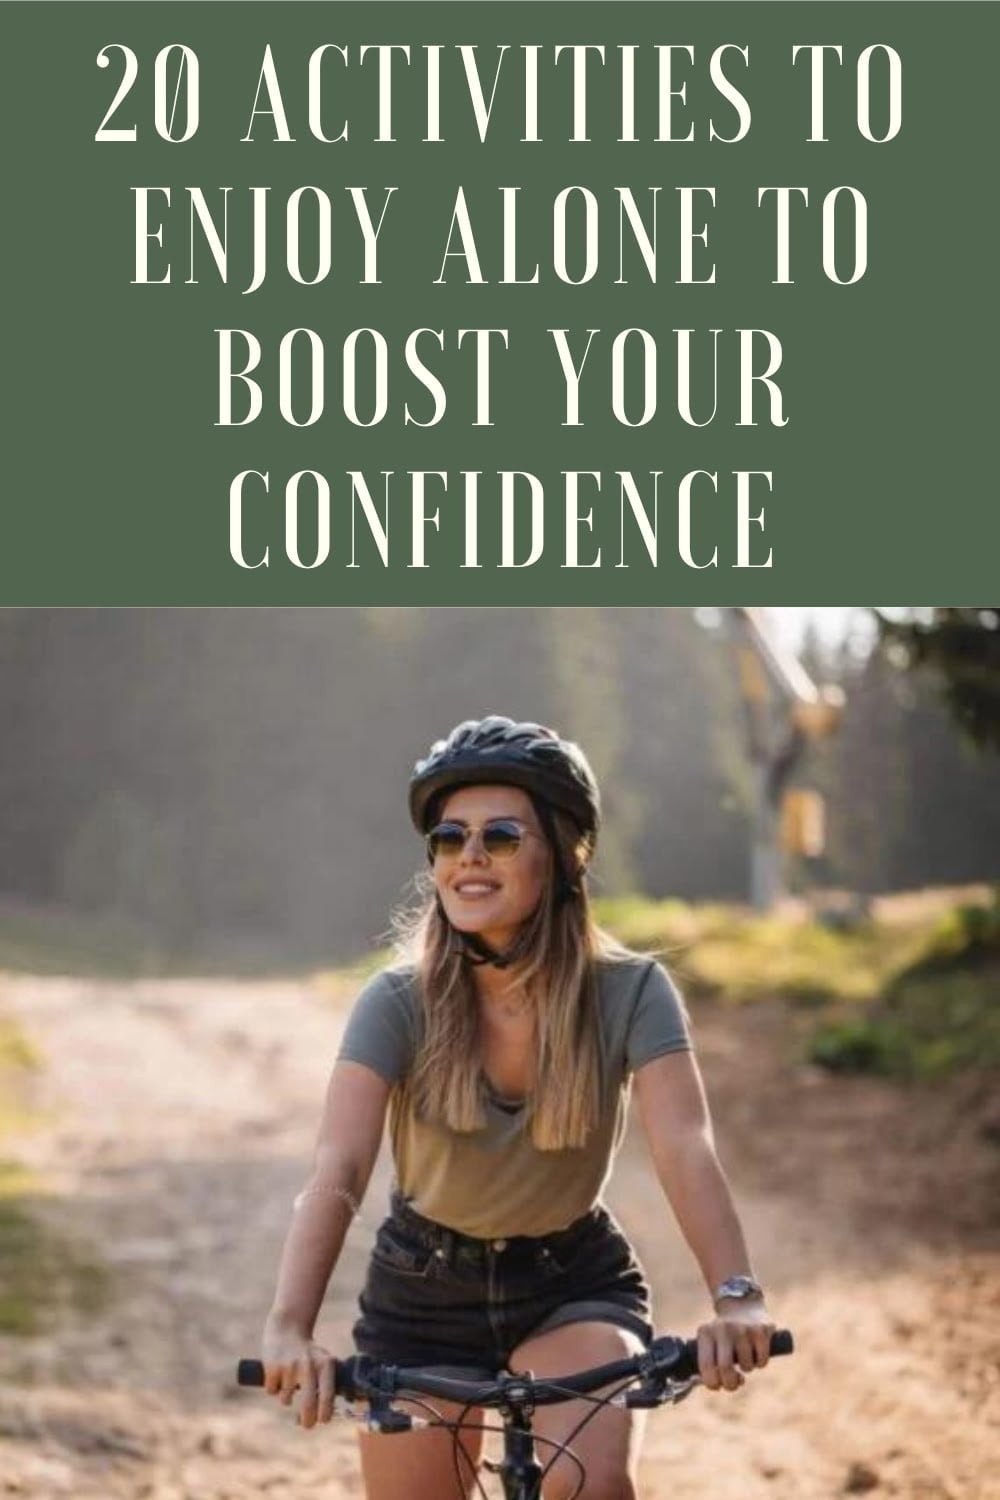 20 Activities to Enjoy Alone to Boost Your Confidence - mommykingdom.com